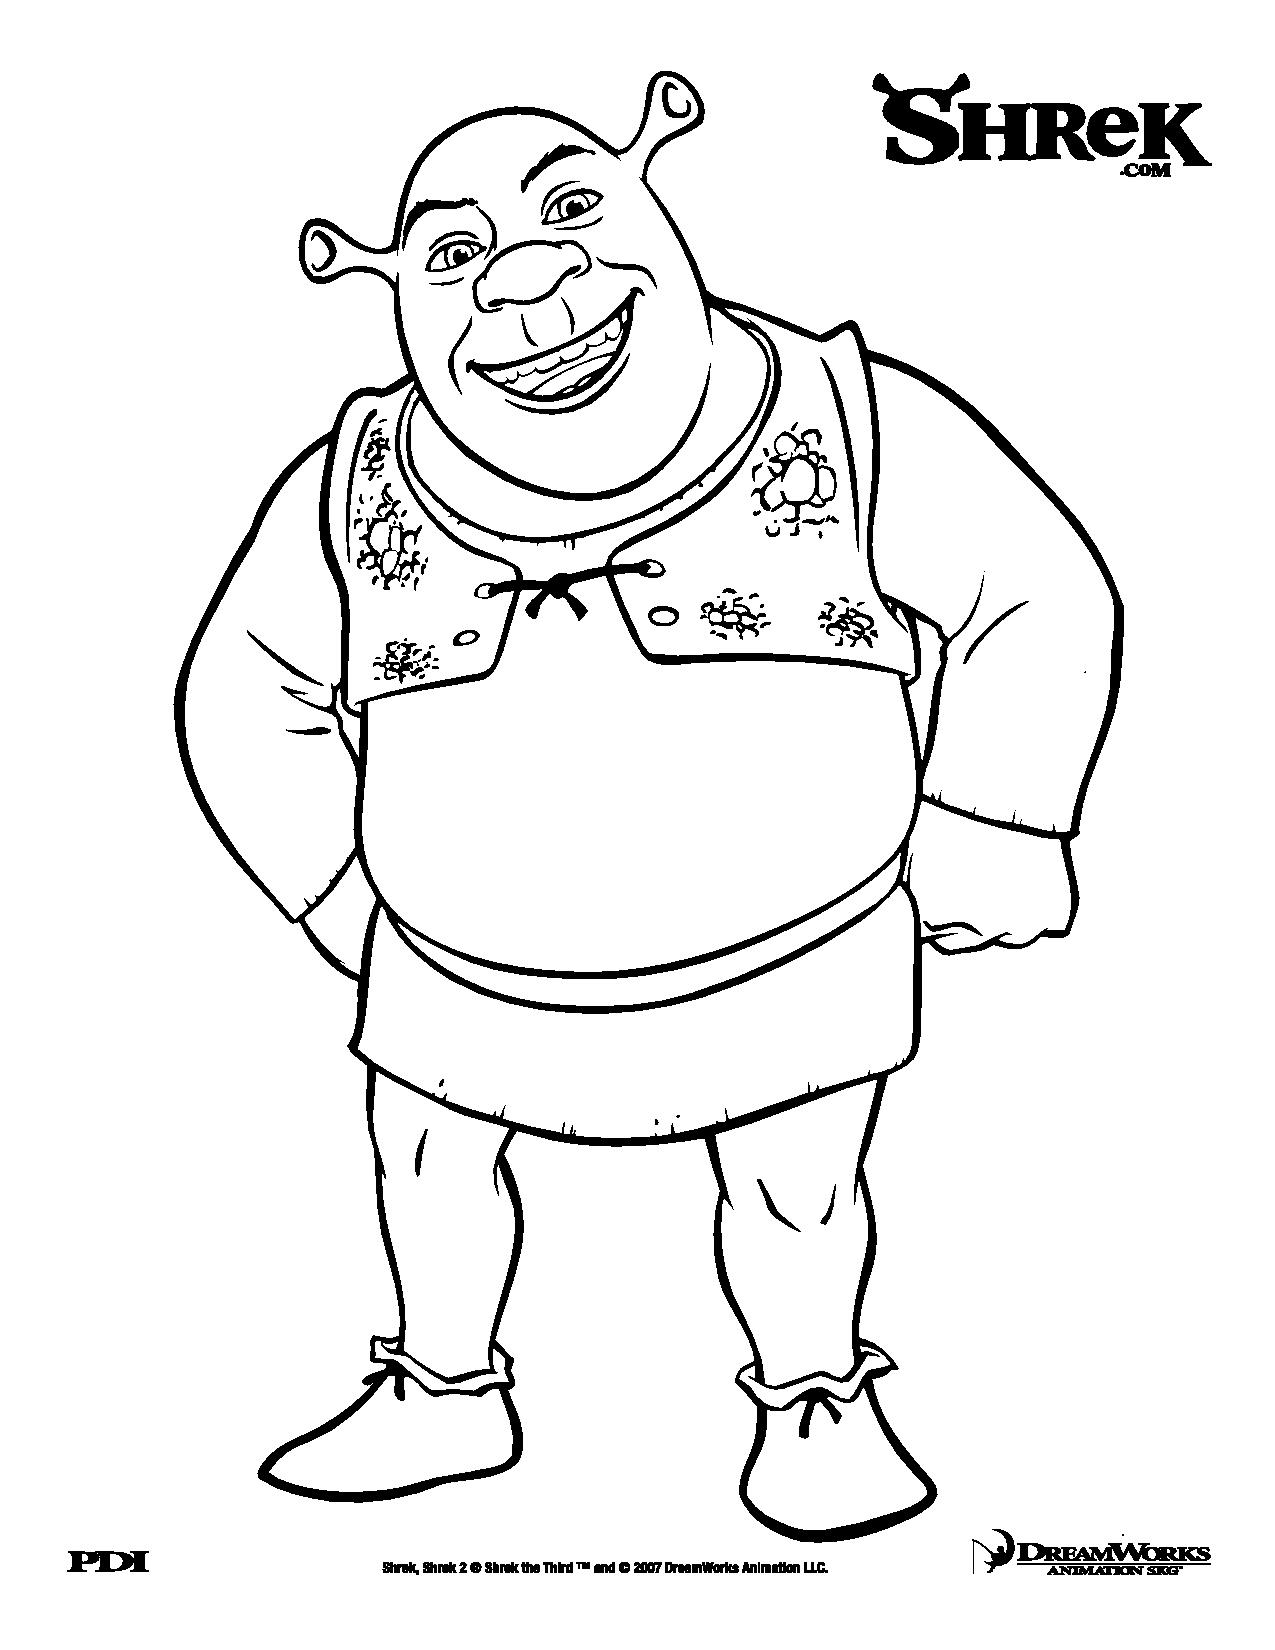 shrek-coloring-pages-printable-printable-word-searches